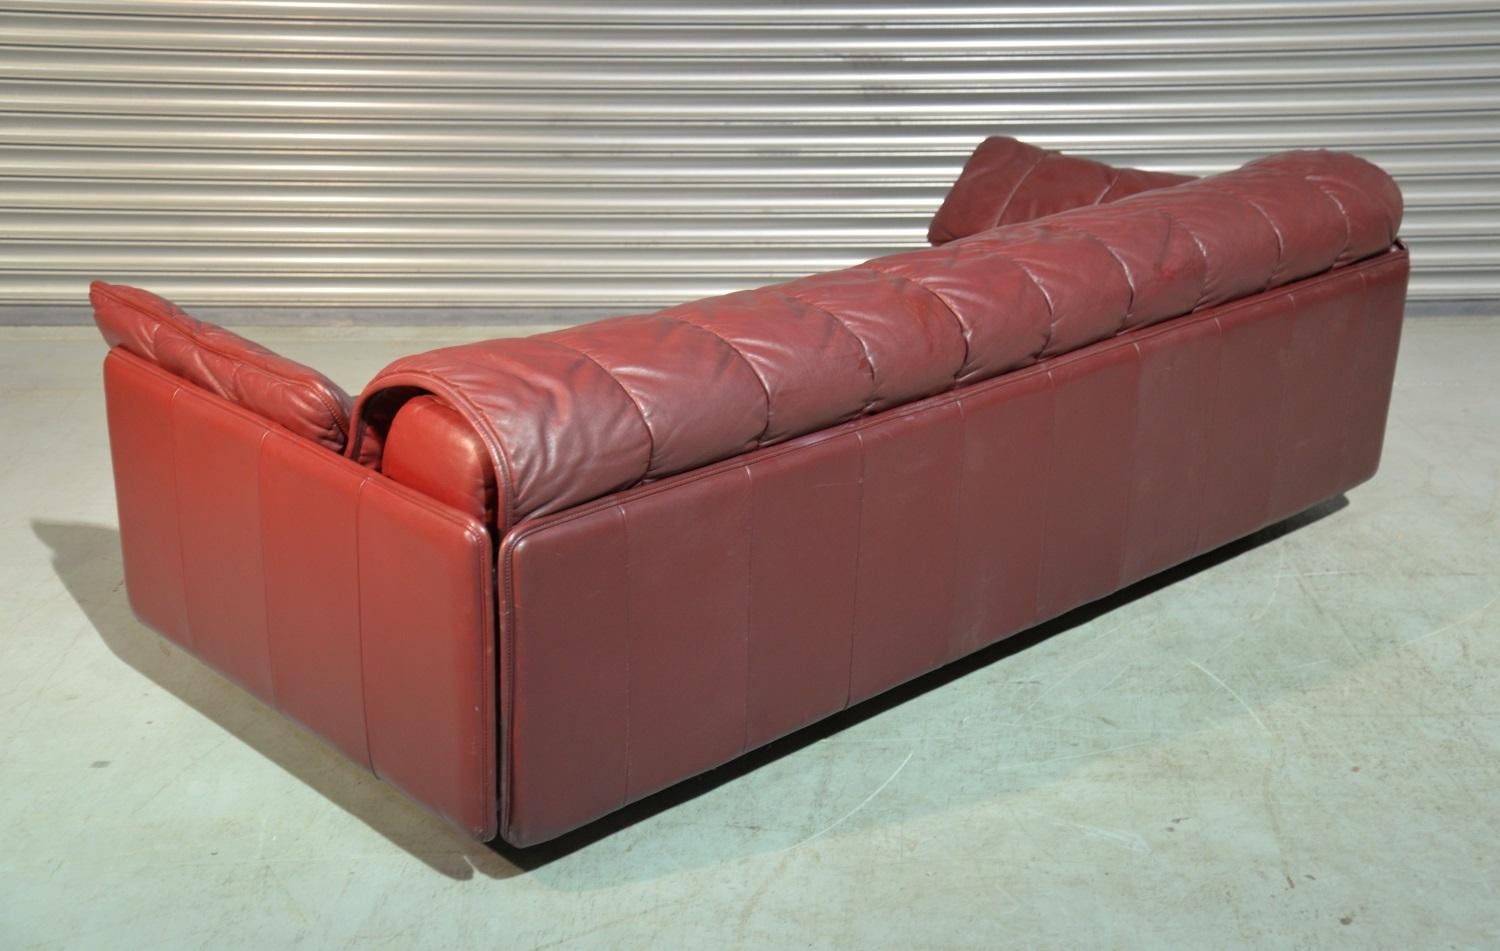 Vintage De Sede Patchwork Leather Sofa or Daybed, Switzerland, 1970s For Sale 2